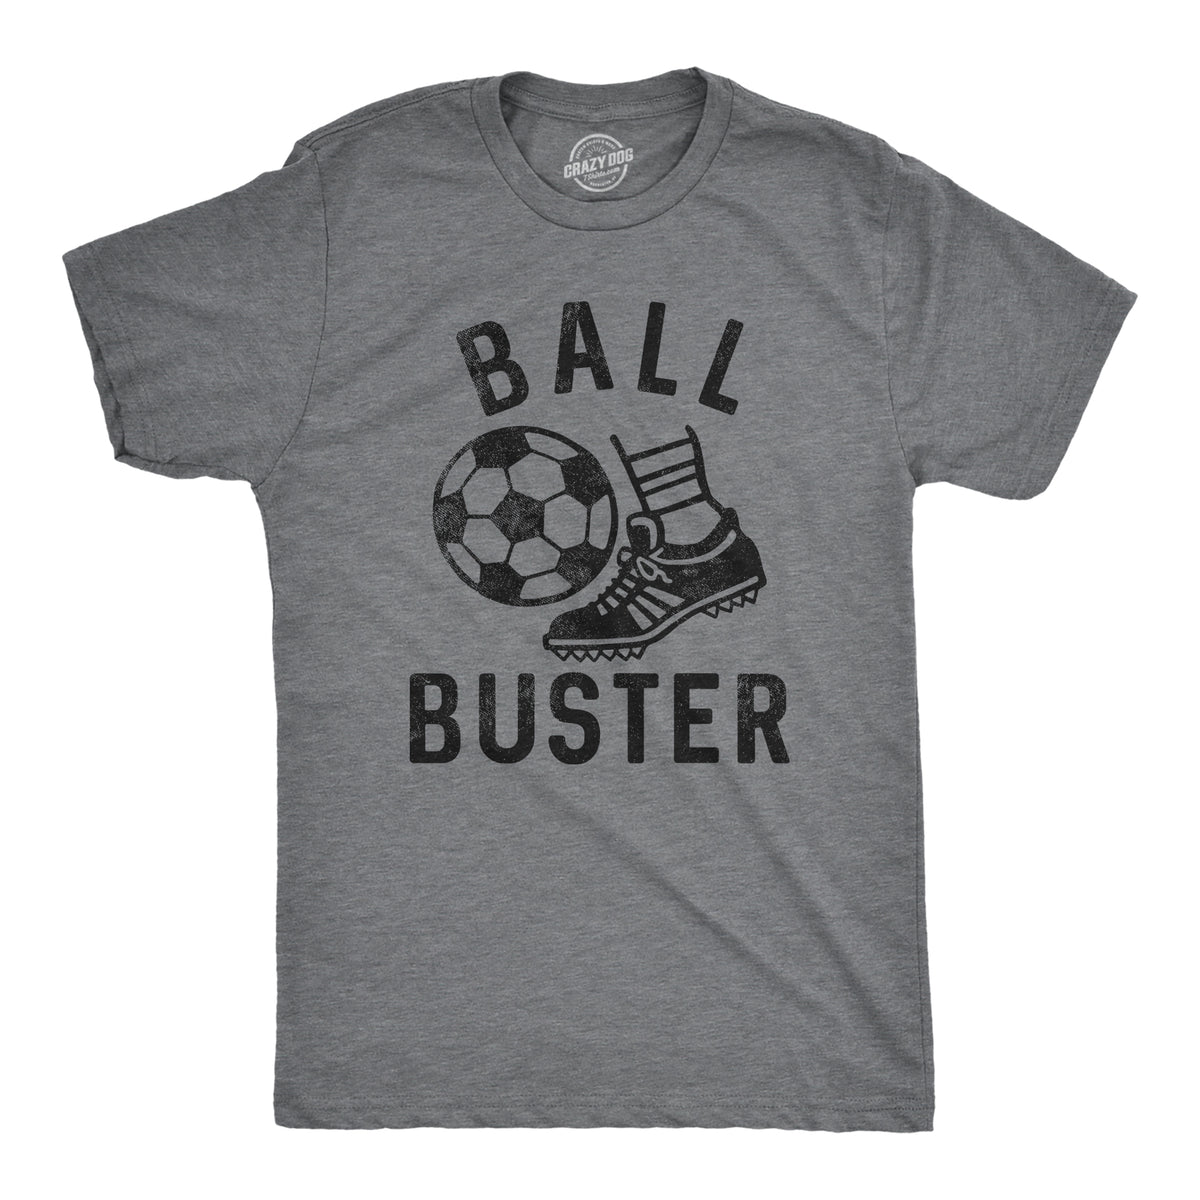 Funny Dark Heather Grey - BUSTER Ball Buster Soccer Mens T Shirt Nerdy Soccer sarcastic Tee